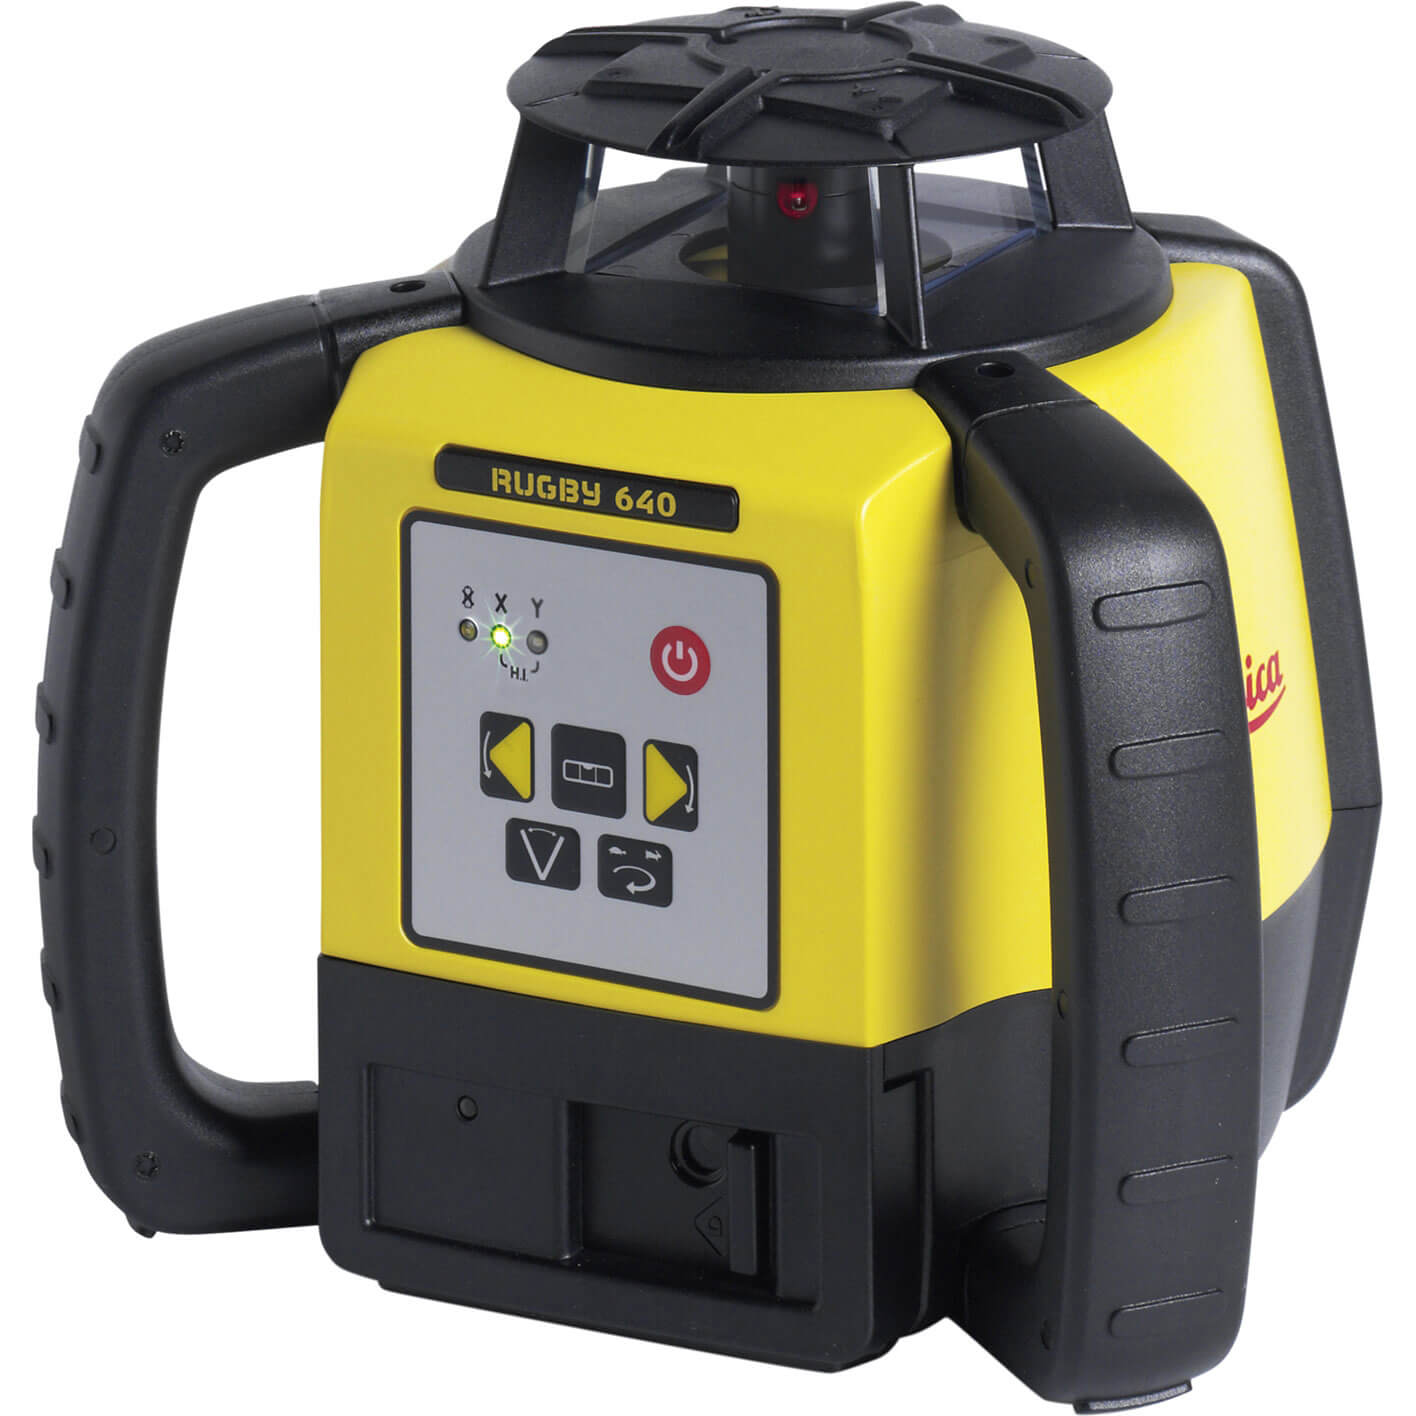 Photo of Leica Geosystems Rugby 640 Rotating Laser Level